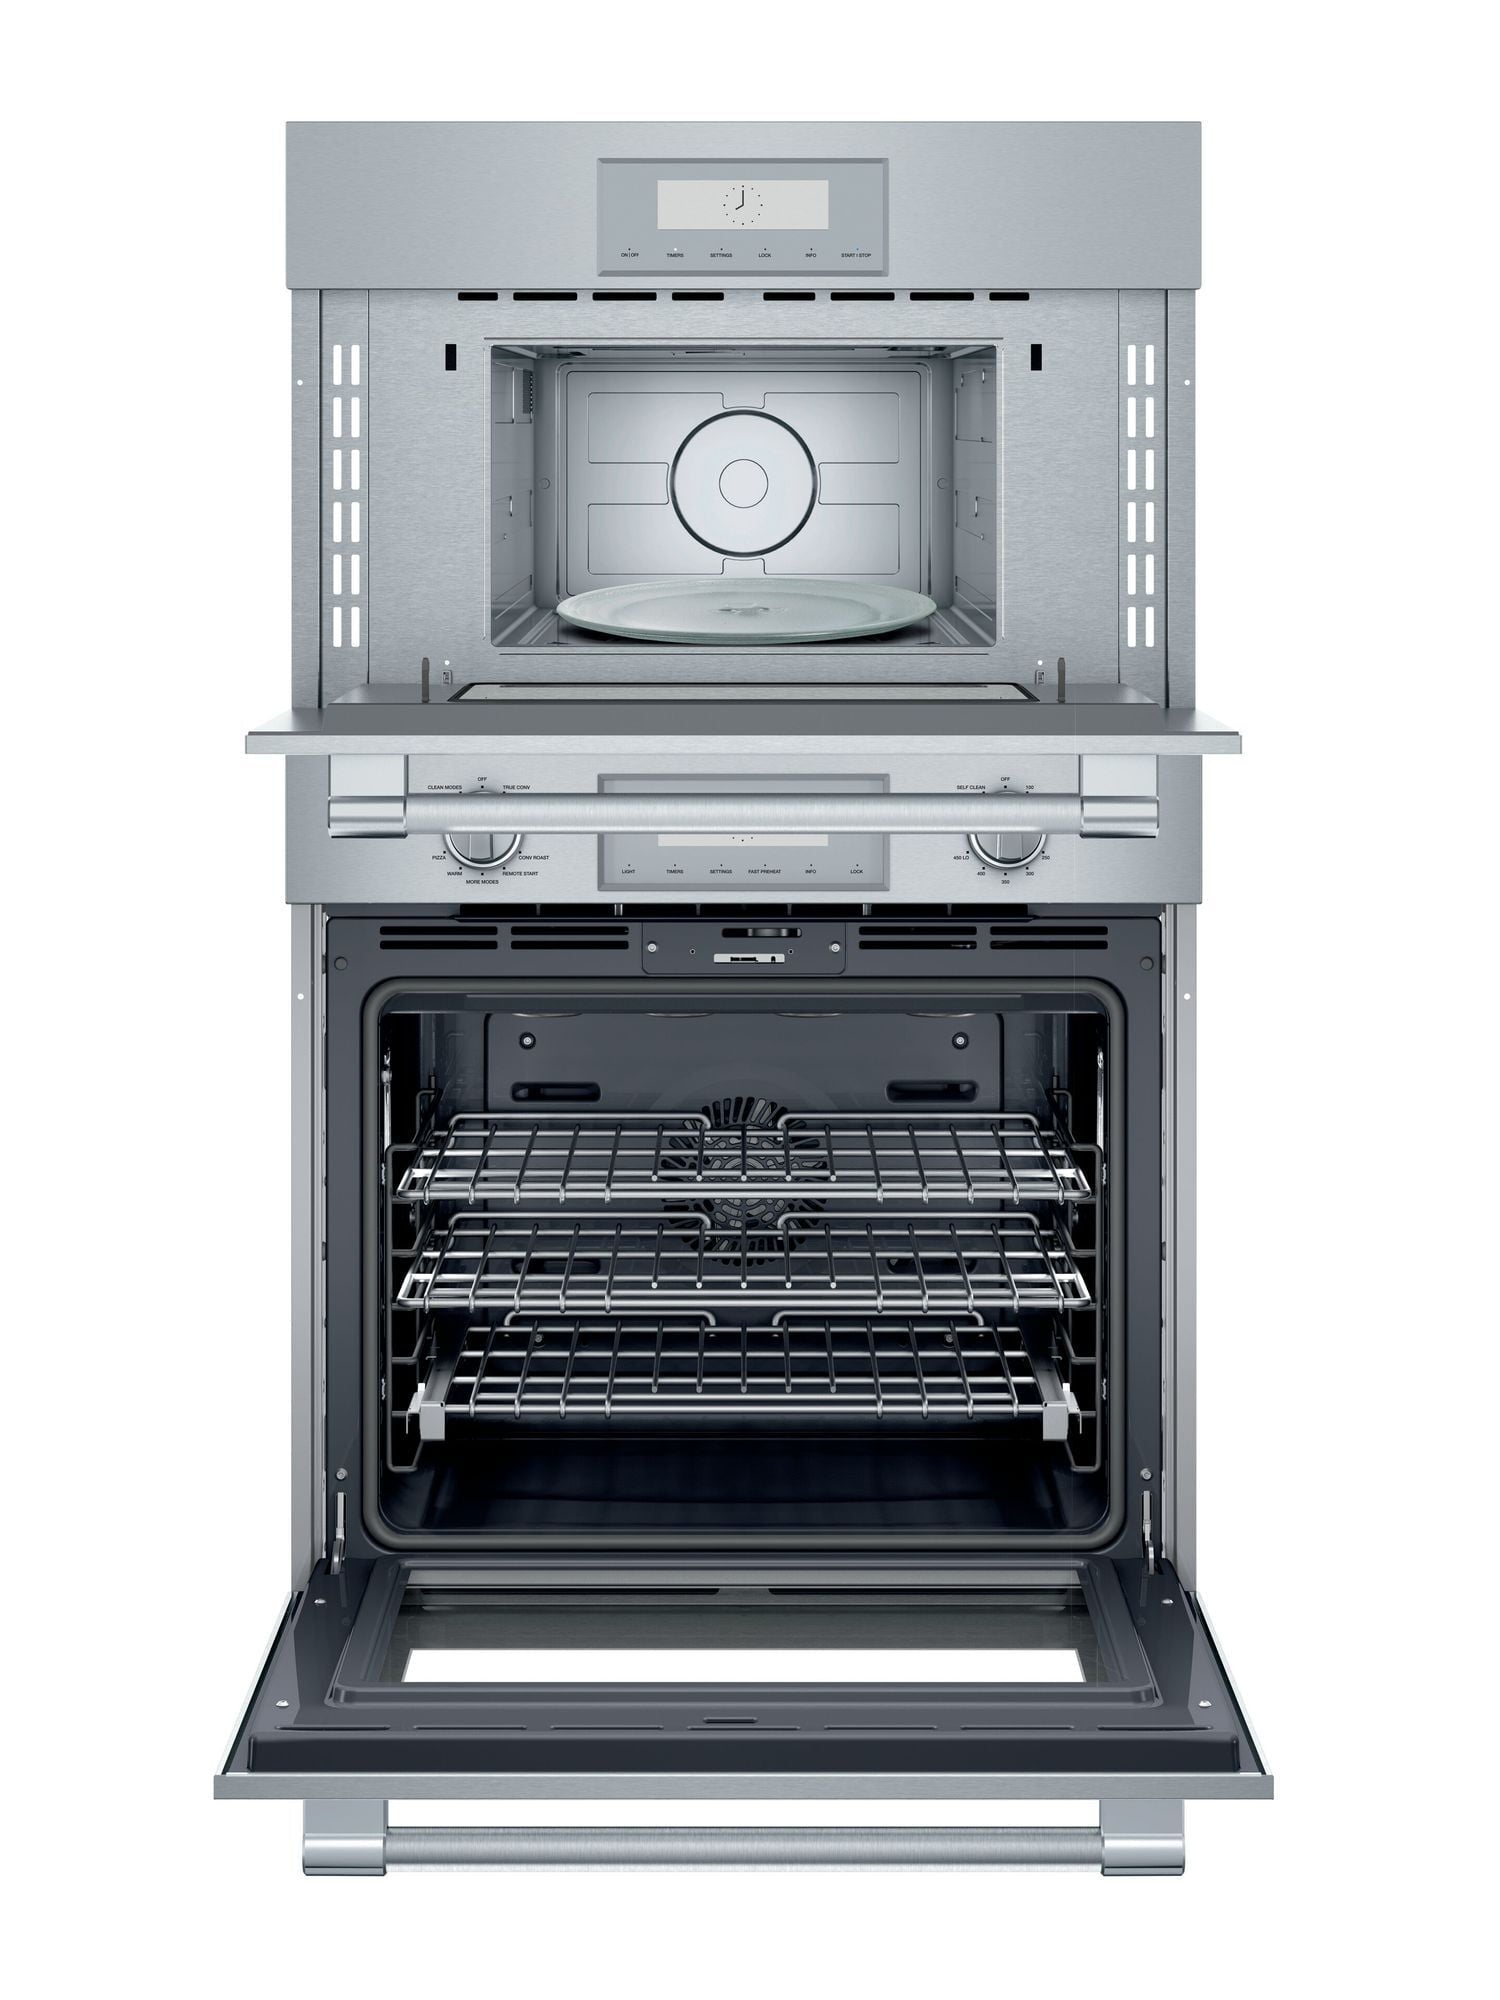 Thermador POM301W 30-Inch Professional Combination Wall Oven